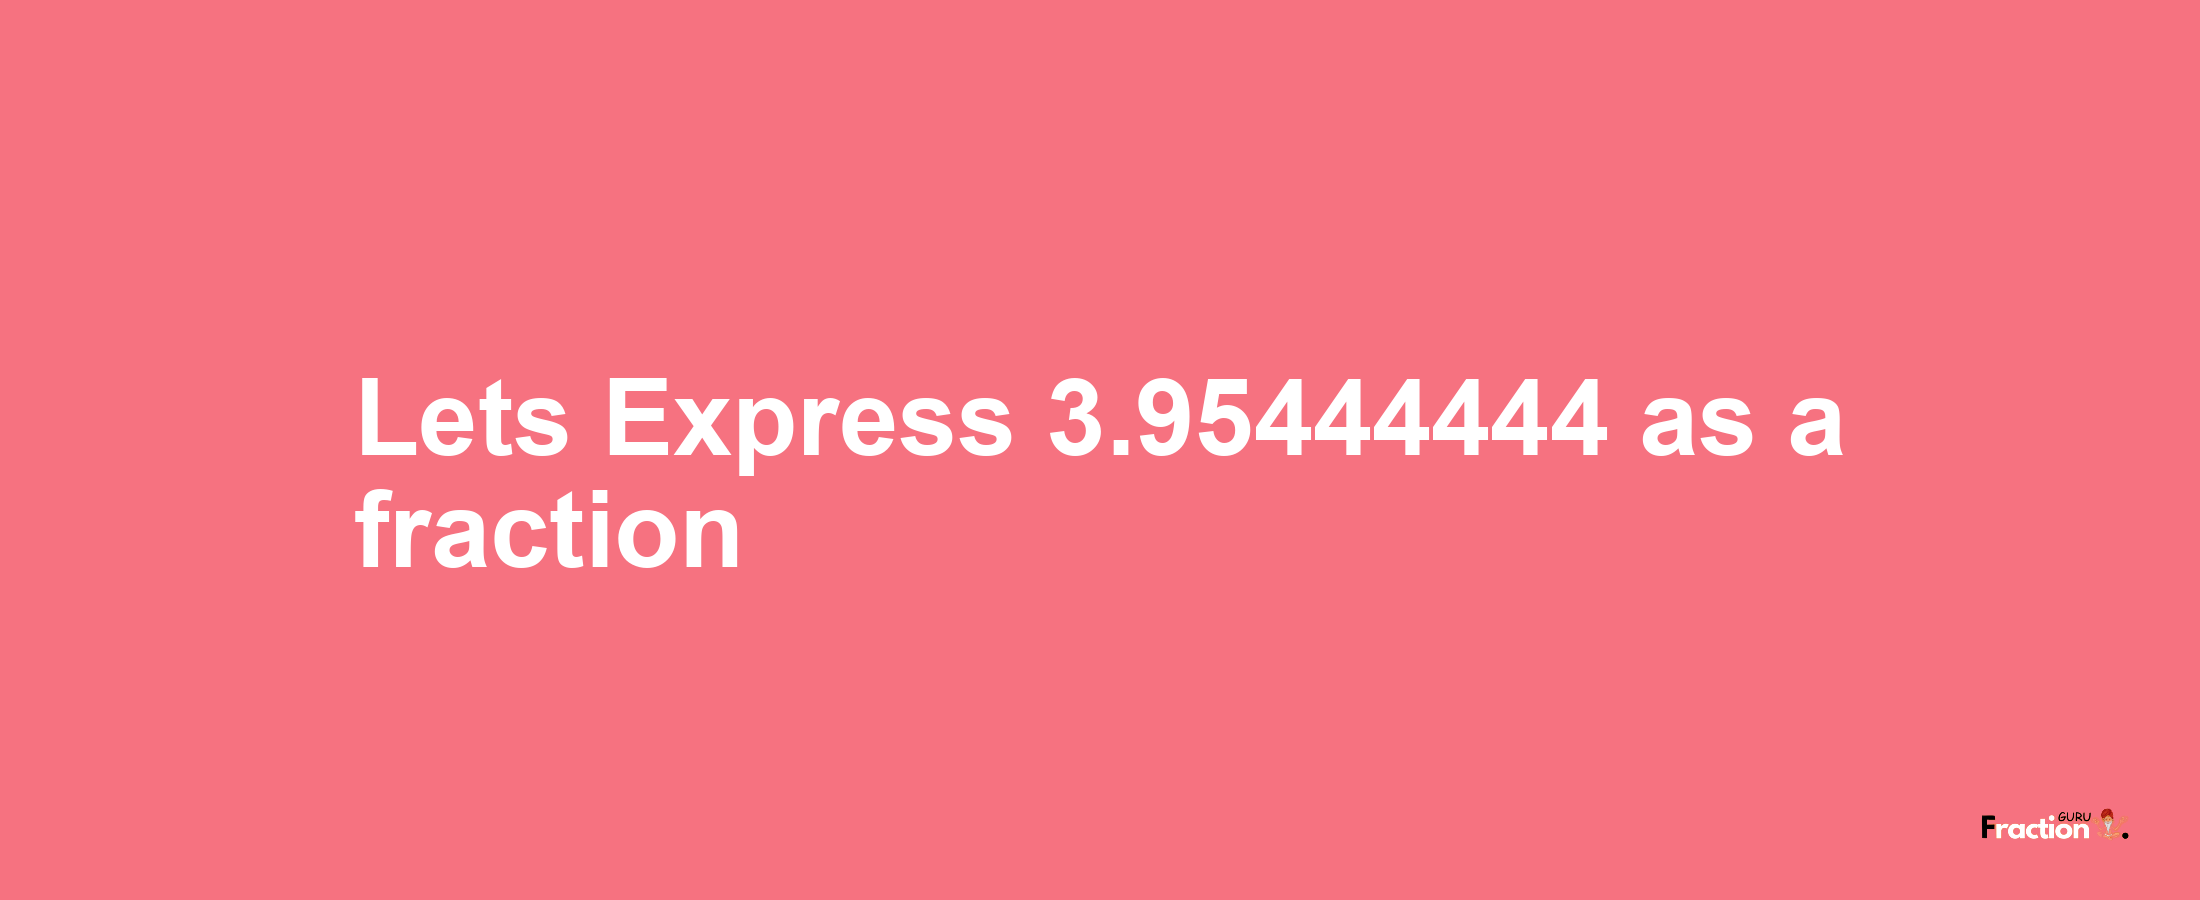 Lets Express 3.95444444 as afraction